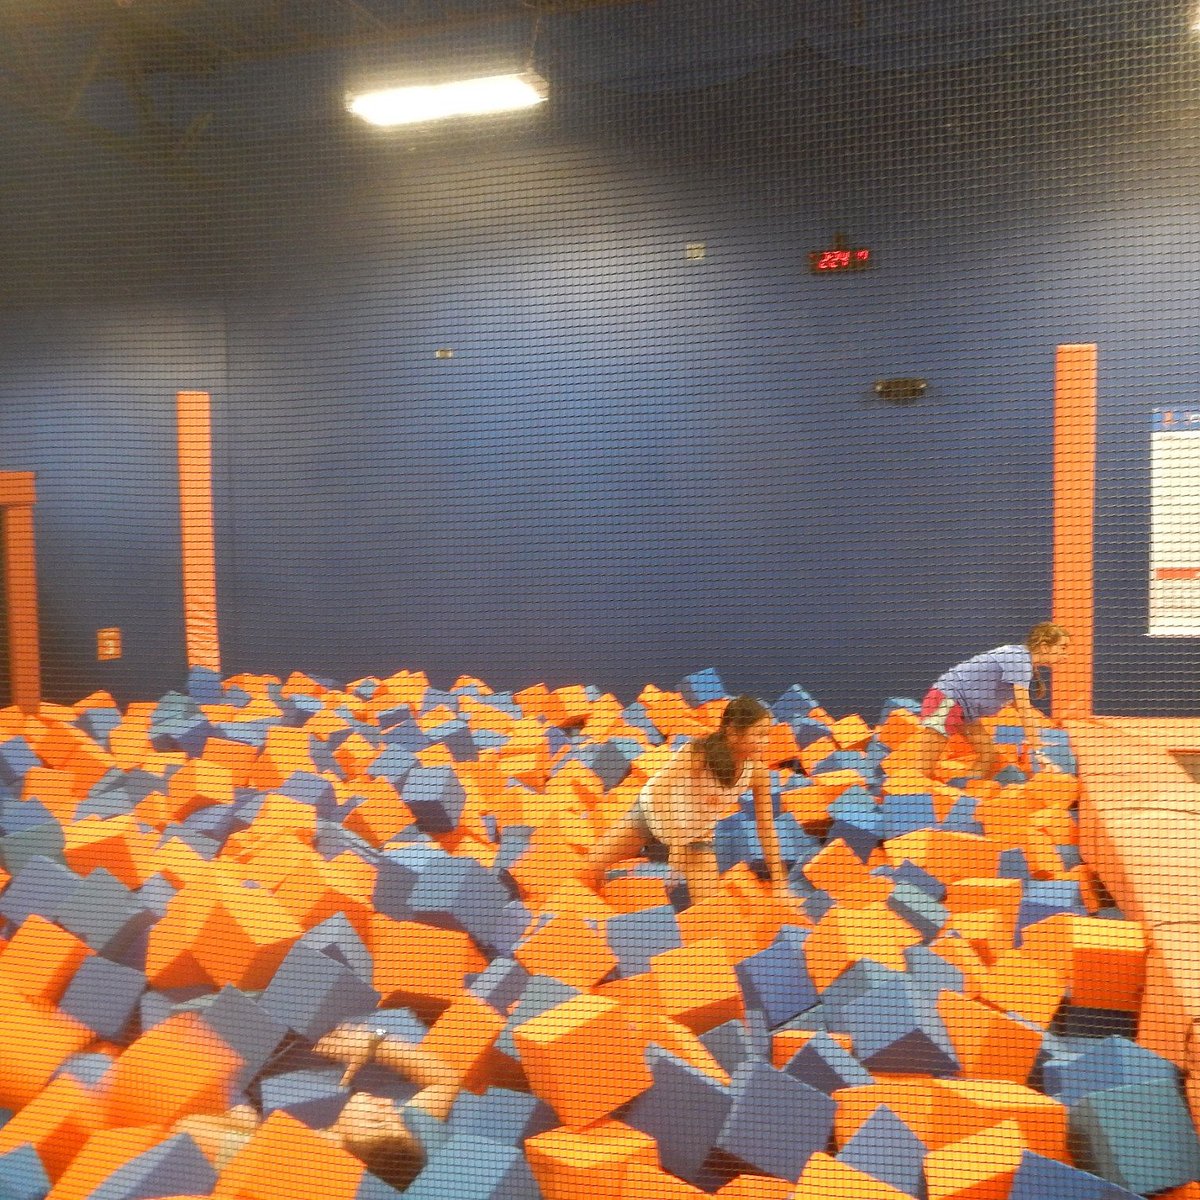 sky-zone-trampoline-park-greensboro-all-you-need-to-know-before-you-go